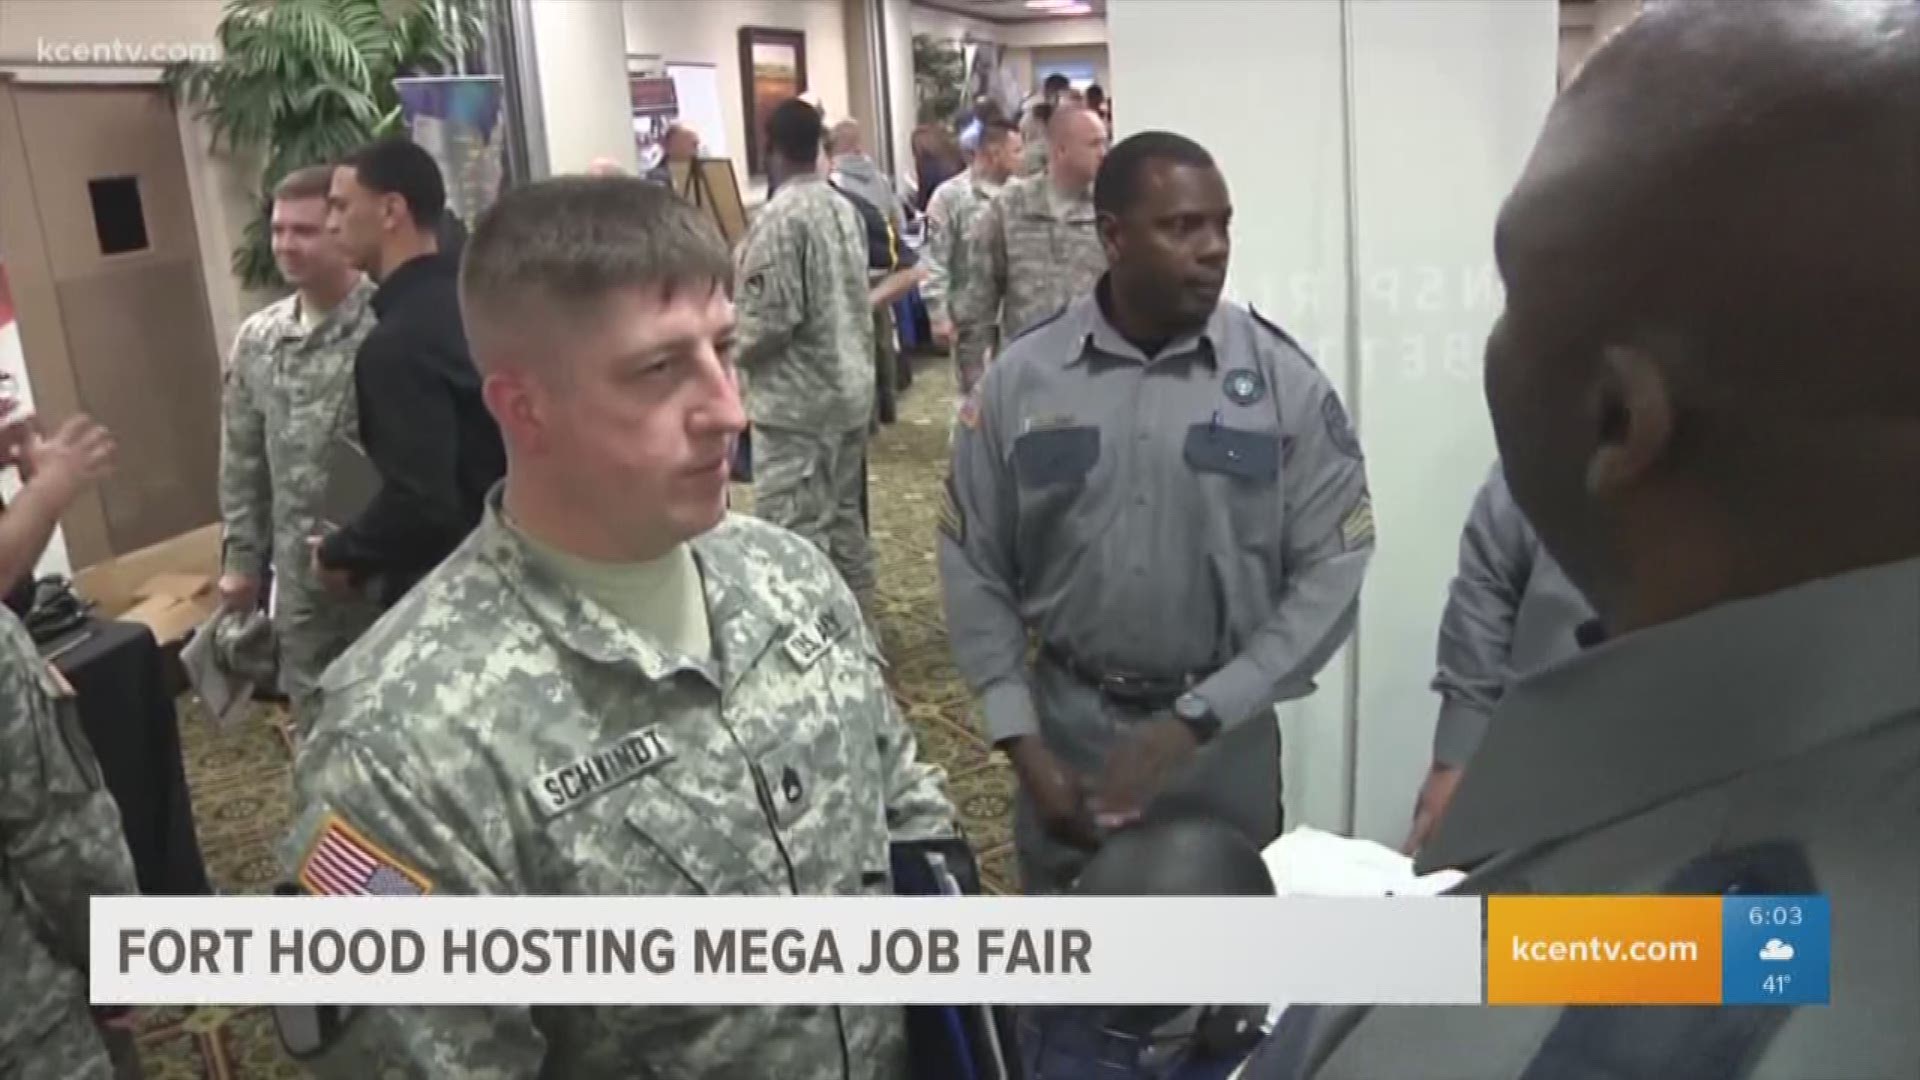 Fort Hood is hosting their 42nd Mega Job Fair from 10 a.m. to 3 p.m. Tuesday. This event is open to soldiers and civilians.